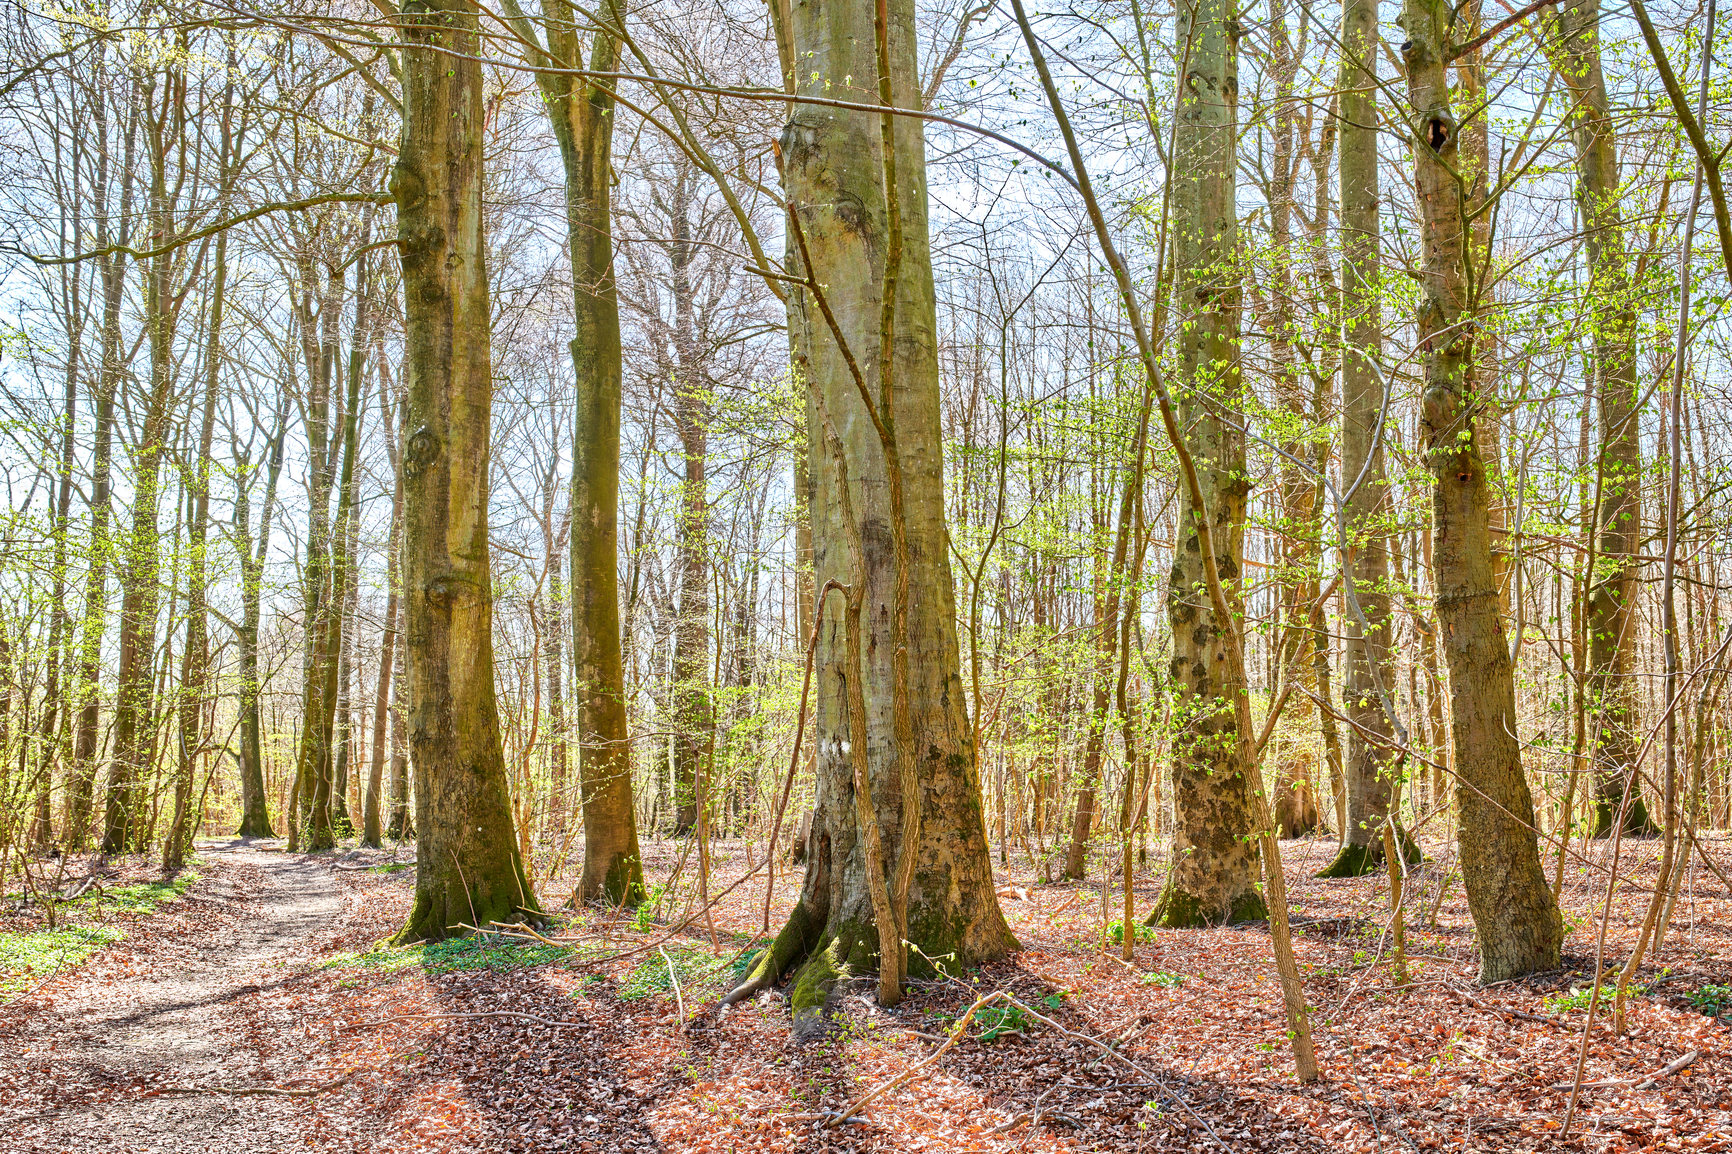 Buy stock photo Landscape view of beech trees in a sunny forest or woods in remote countryside of Norway. Wood used for timber growing in a serene and secluded meadow. Discovering peace and relaxed in mother nature